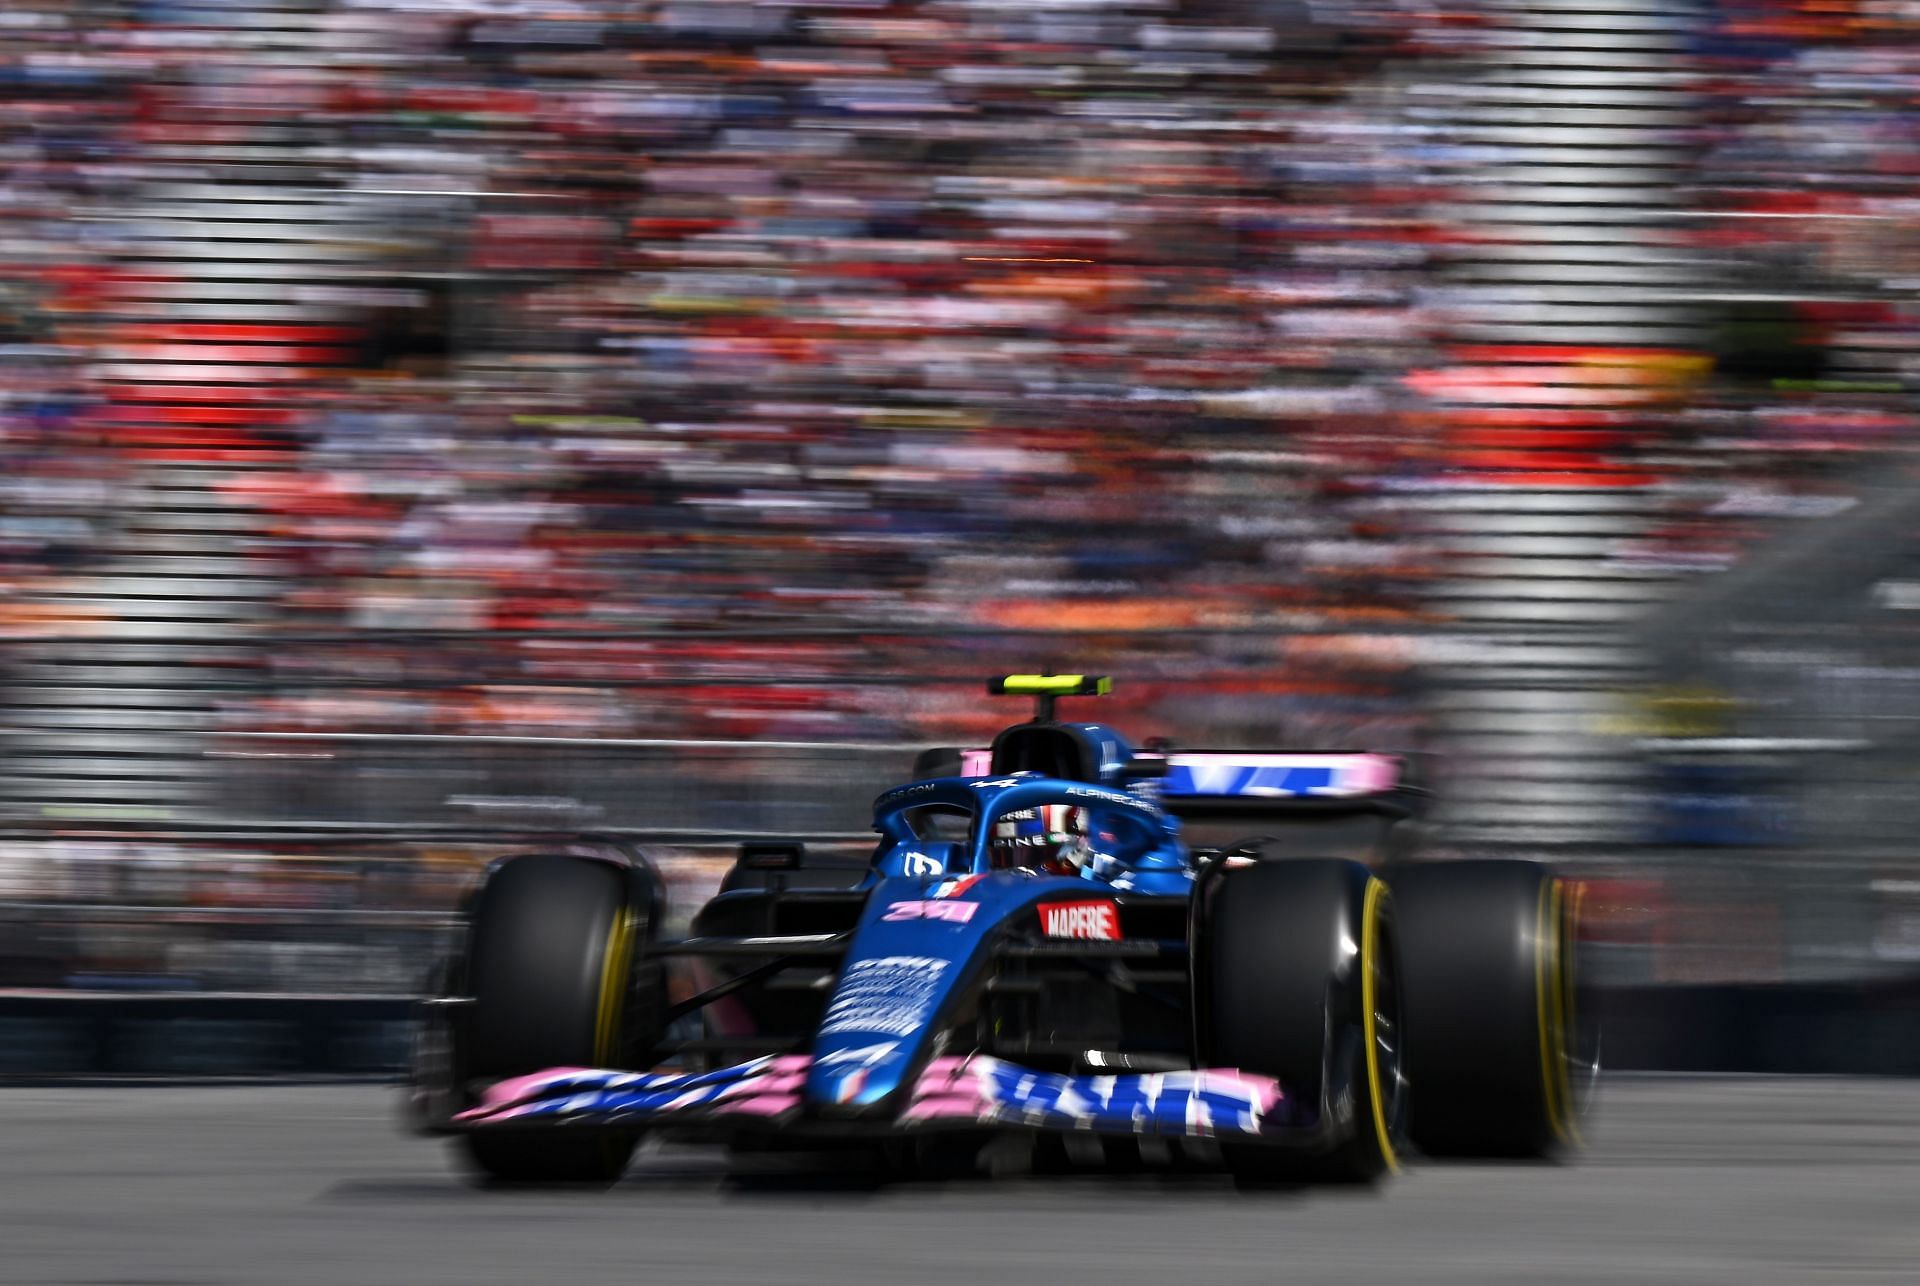 Esteban Ocon driving the (31) Alpine F1 A522 Renault on track during the F1 Grand Prix of Canada. (Photo by Clive Mason/Getty Images)